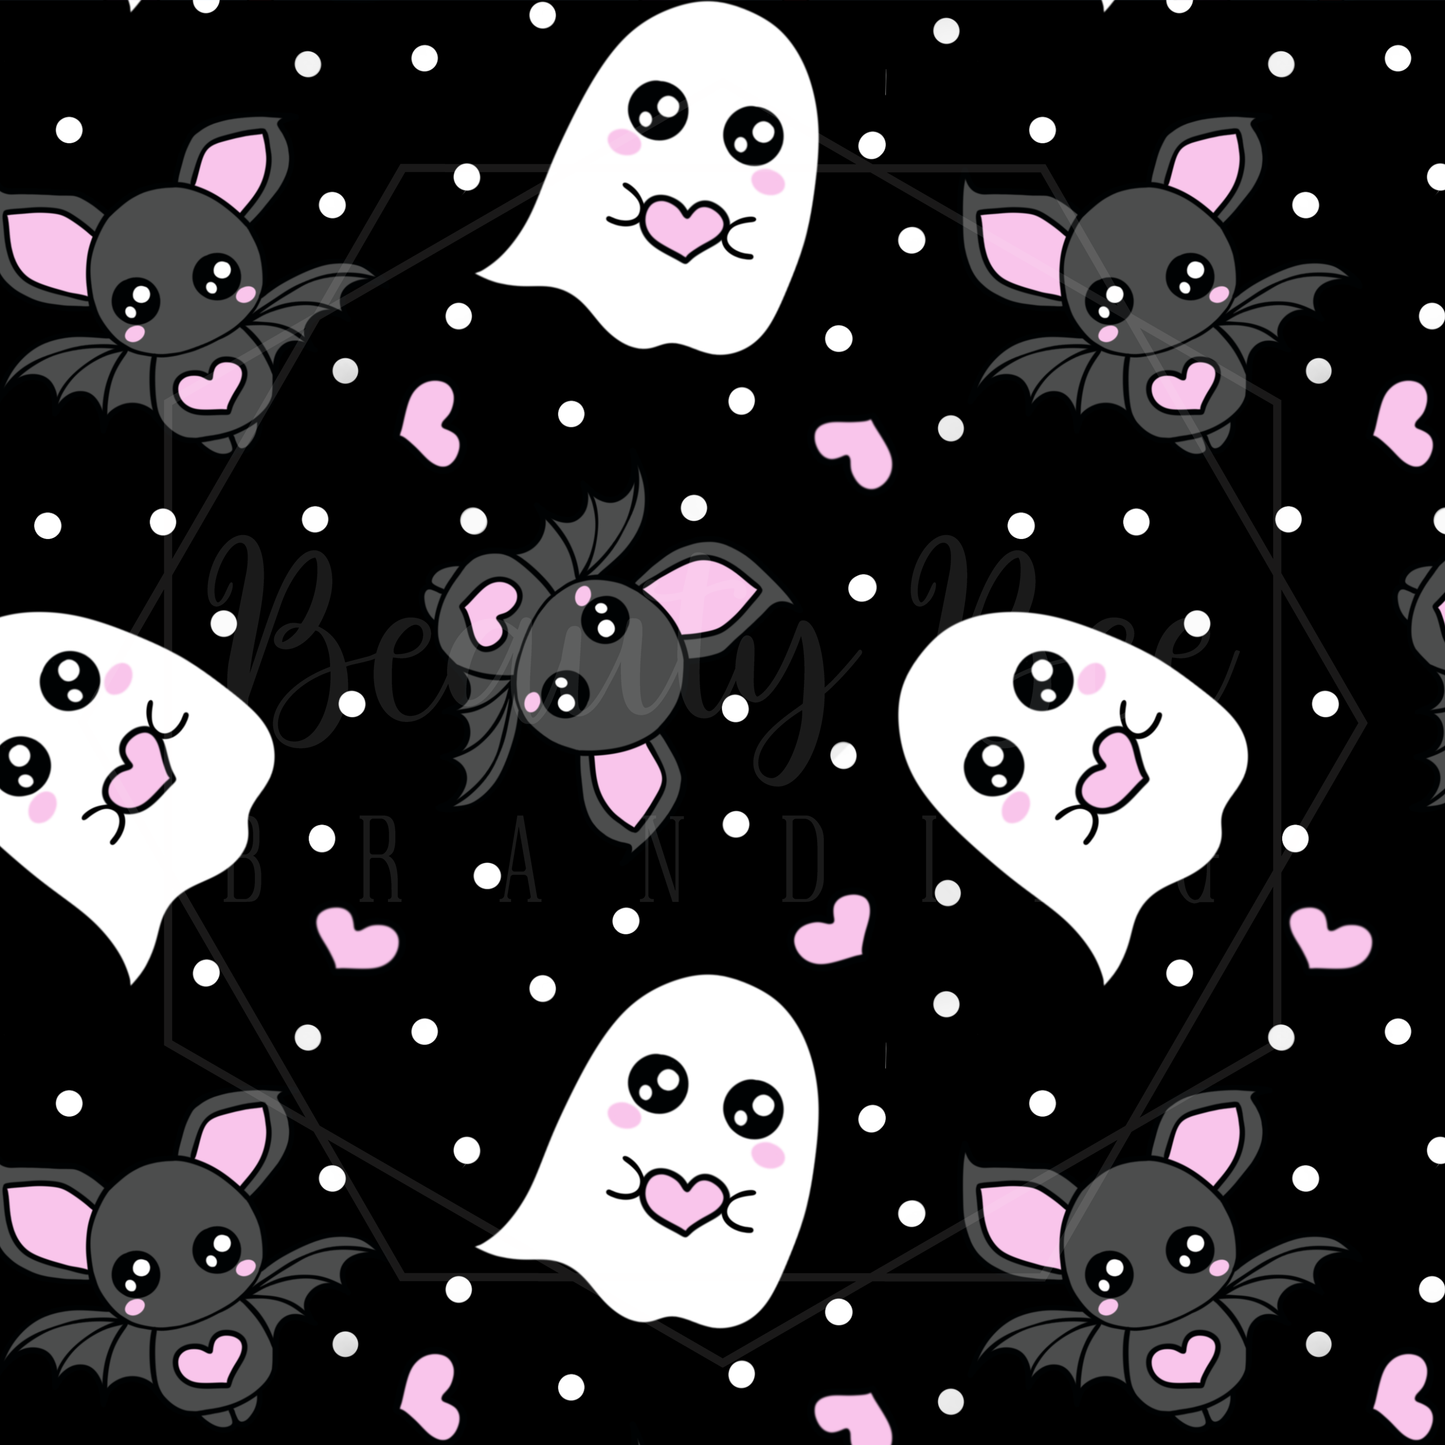 Spooky Love Bats and Ghosts Black SEAMLESS PATTERN